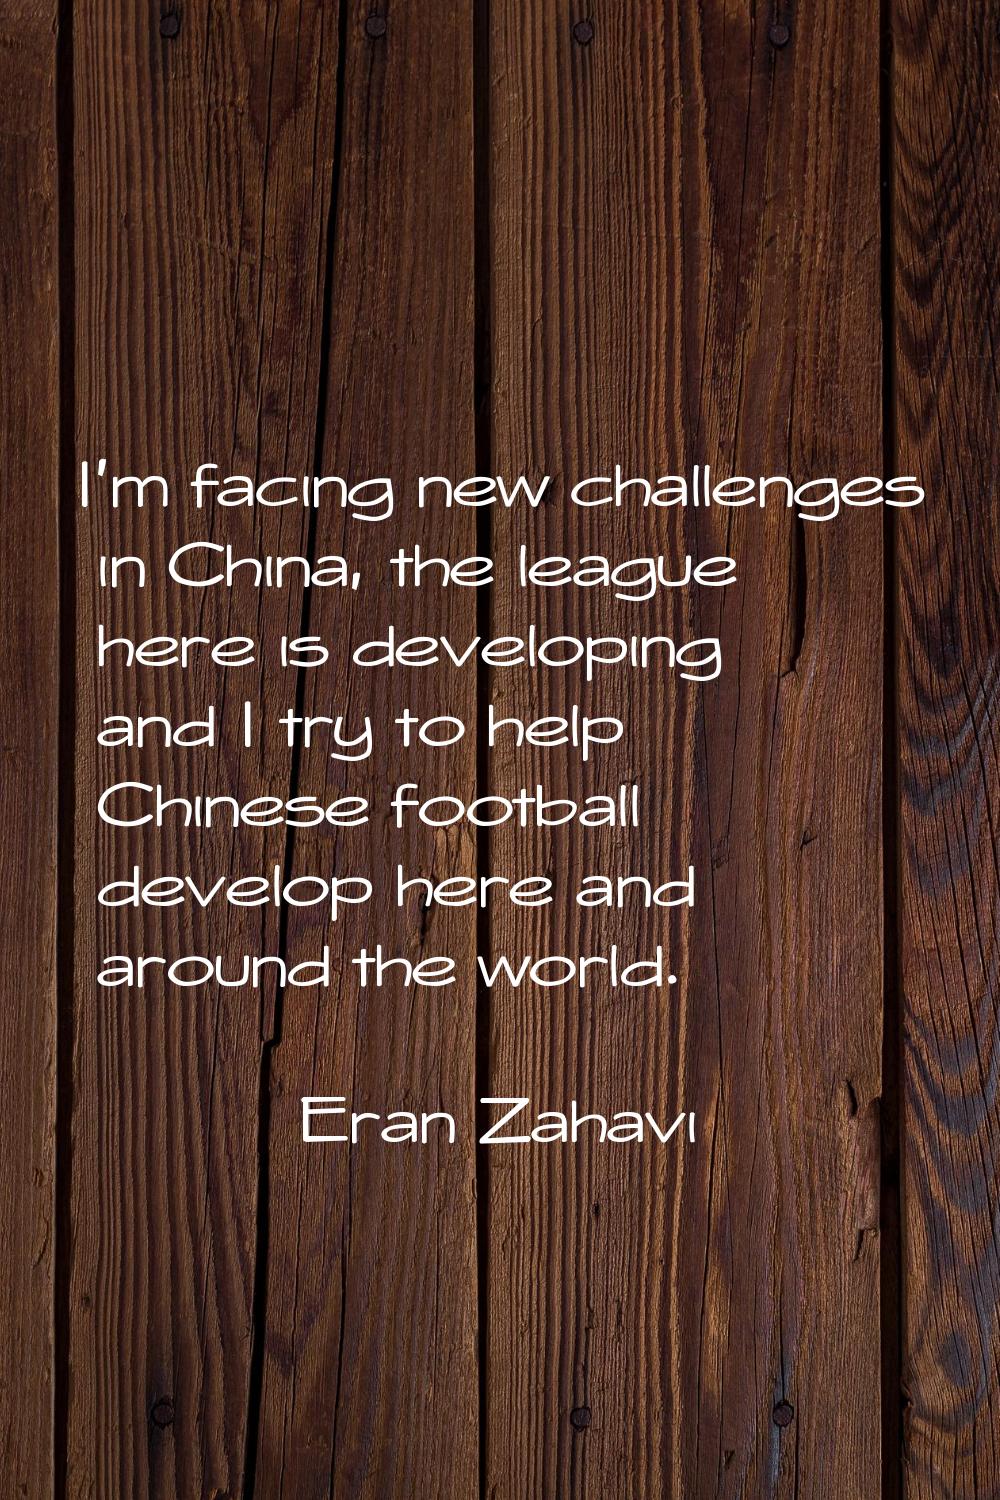 I'm facing new challenges in China, the league here is developing and I try to help Chinese footbal